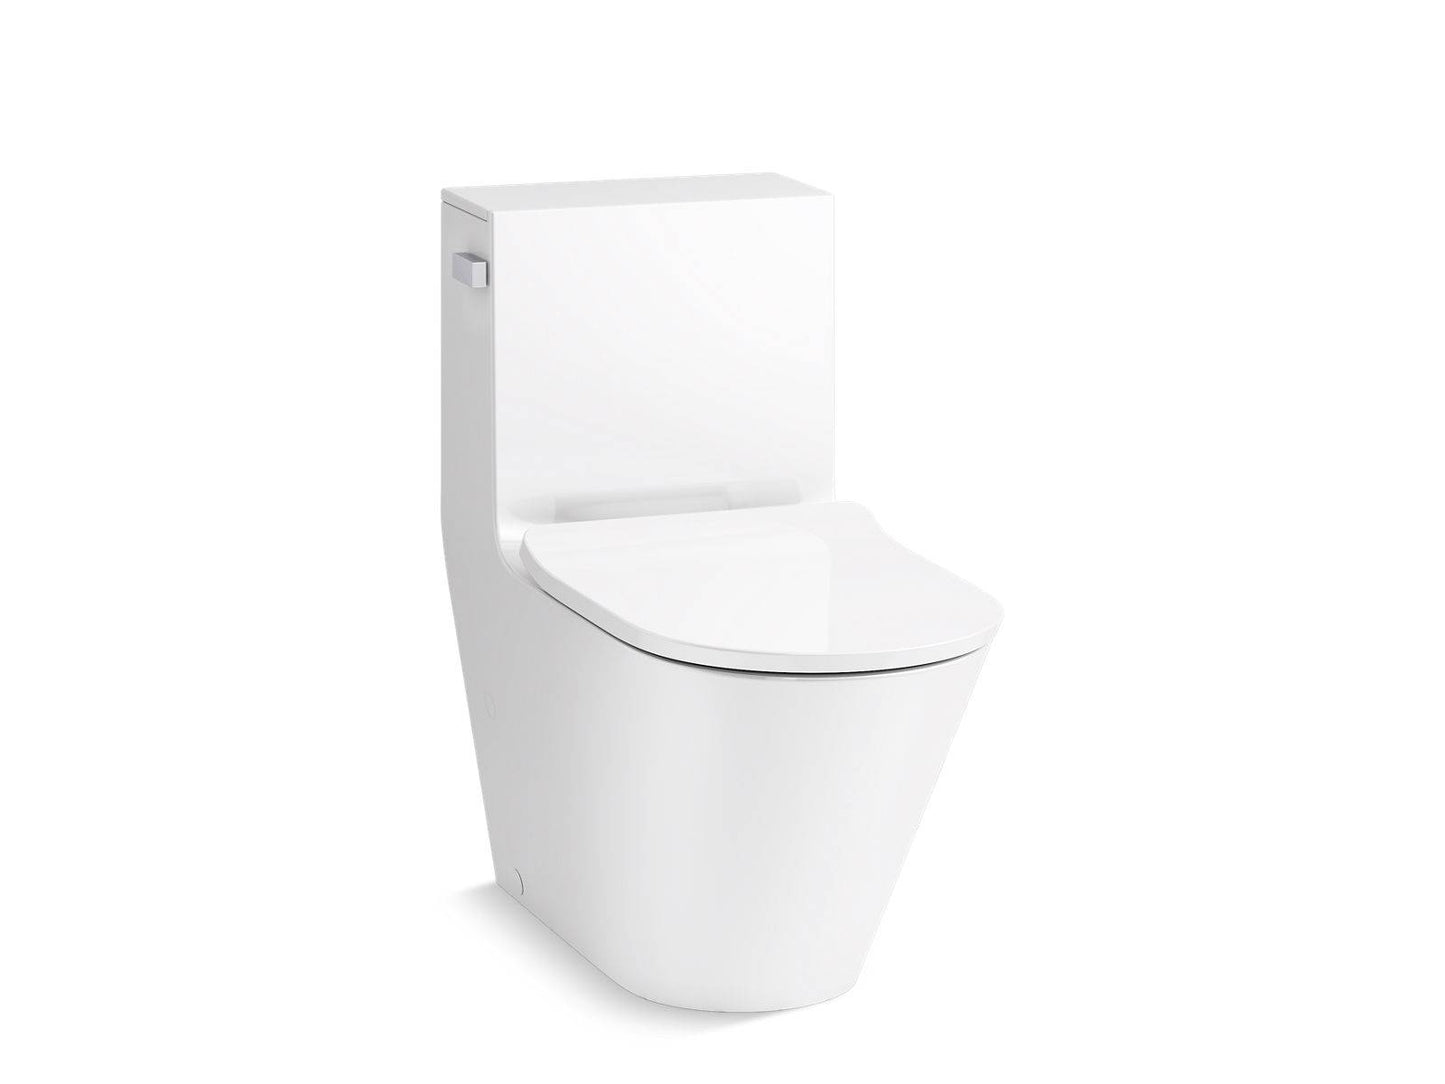 Kohler - Brazn One-Piece Compact Elongated Dual Flush Toilet With Skirted Trapway